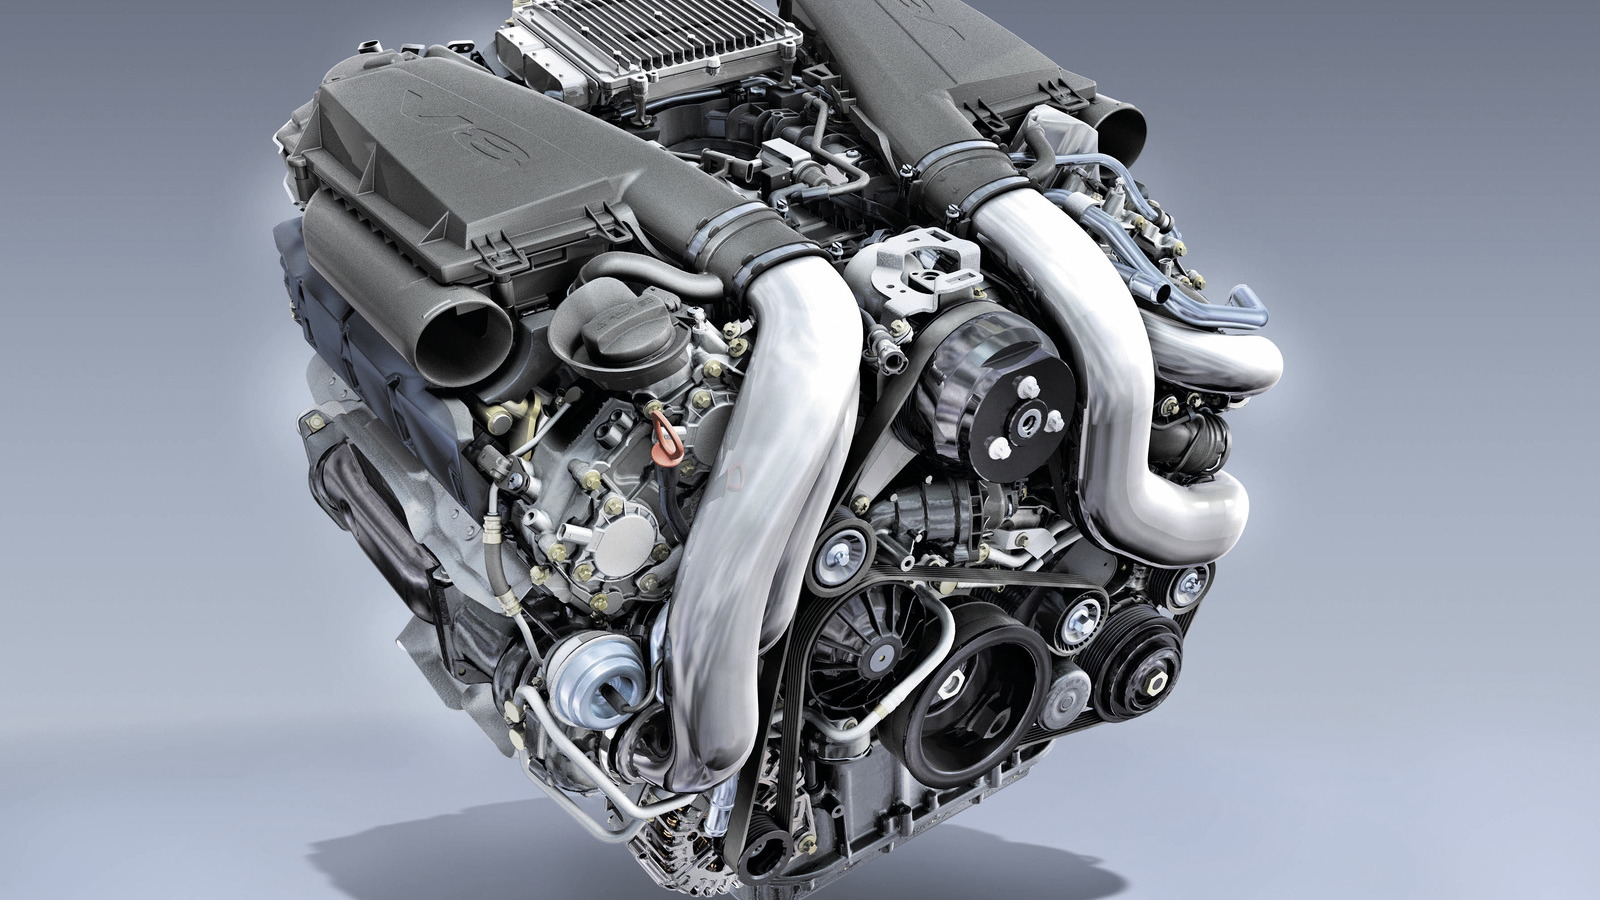 Twin-Turbo 4.6-Liter V-8 Spreading Across 2012 Mercedes-Benz Lineup.